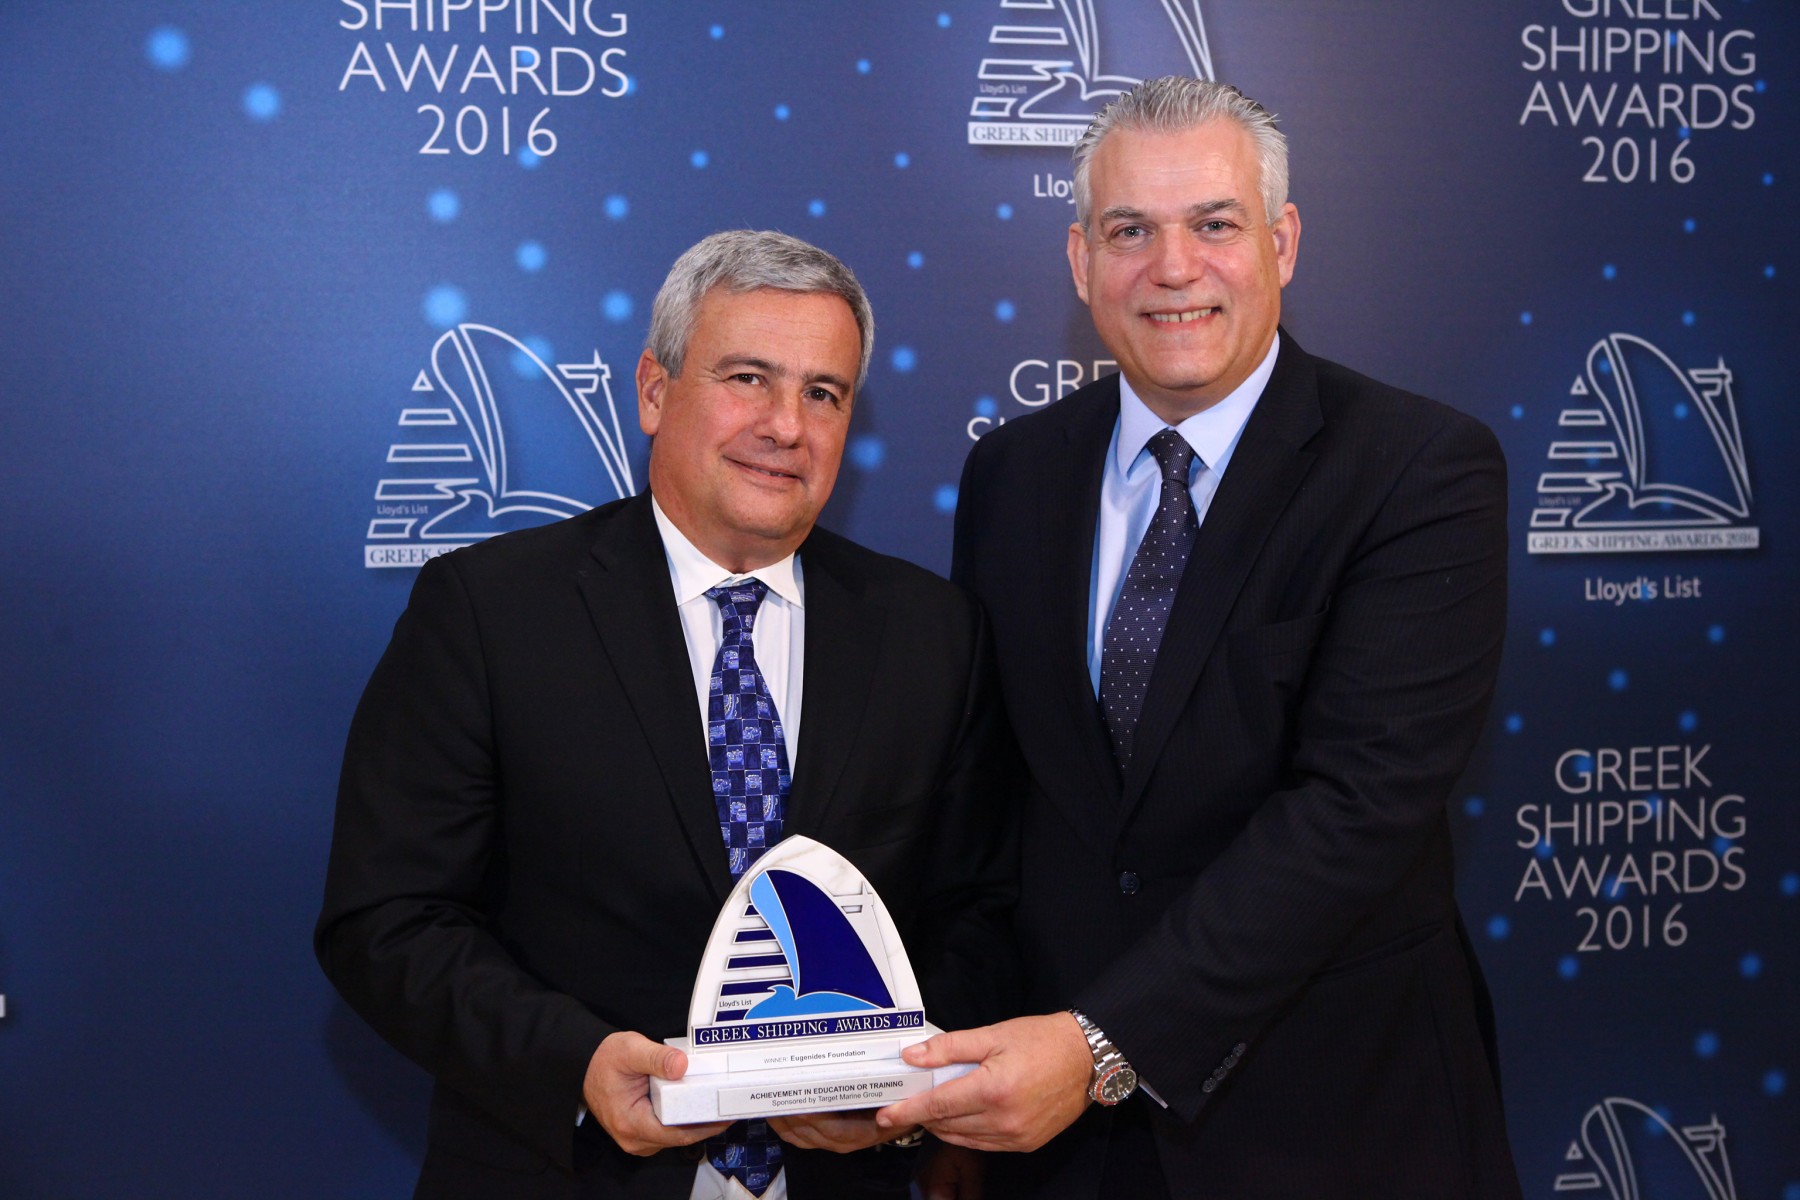 Mr. Leonidas Demetriades-Eugenides of the Eugenides Foundation accepting the Award for Achievement in Education or Training from Mr. Dimitris Heliotis of sponsor Target Marine Group.